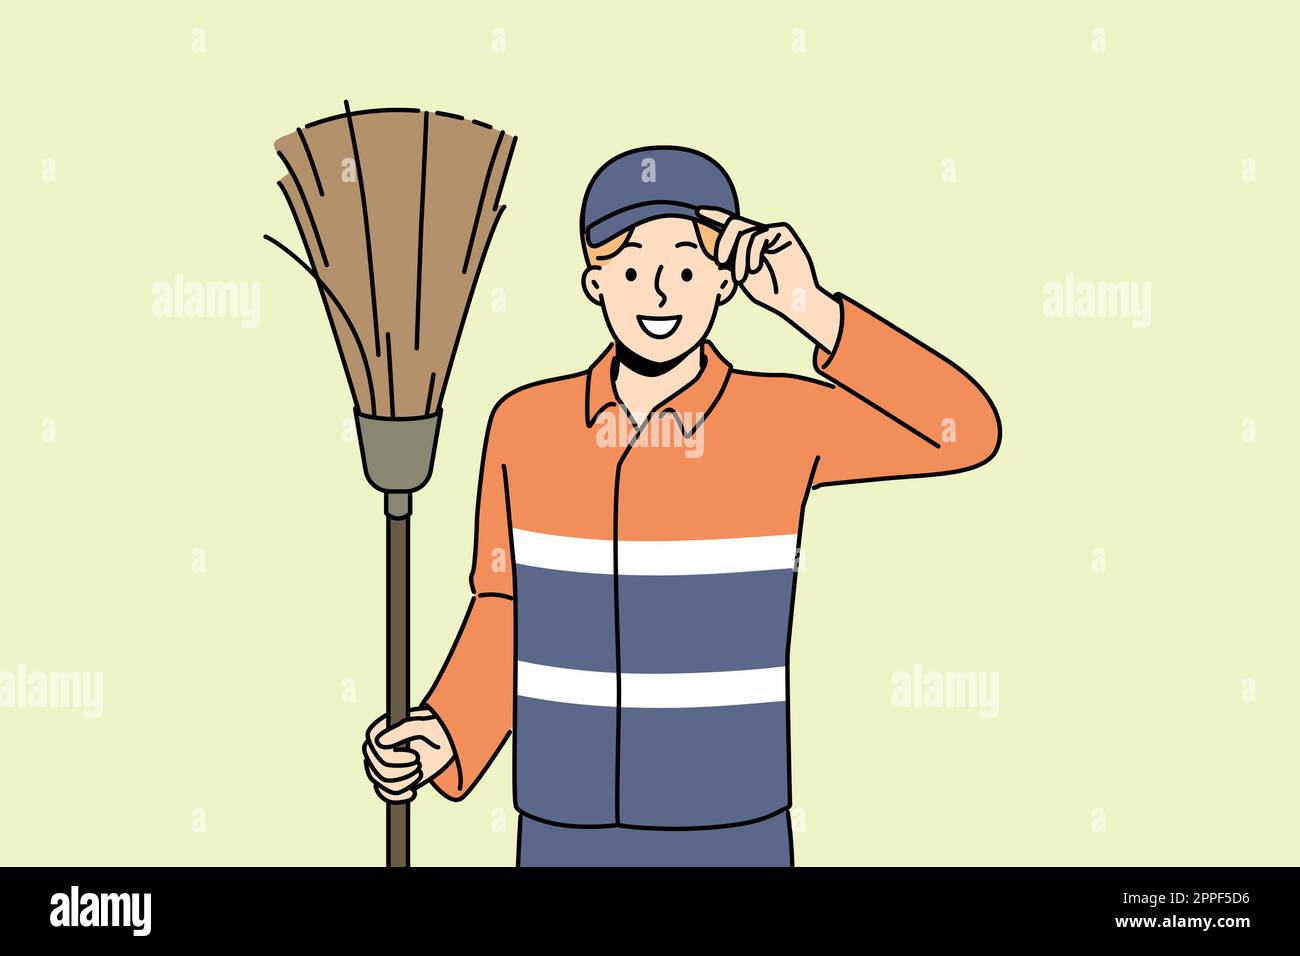 Smiling male janitor in uniform holding brush saluting. Happy man cleaner or swabber greeting with people. Occupation concept. Vector illustration.  Stock Vector